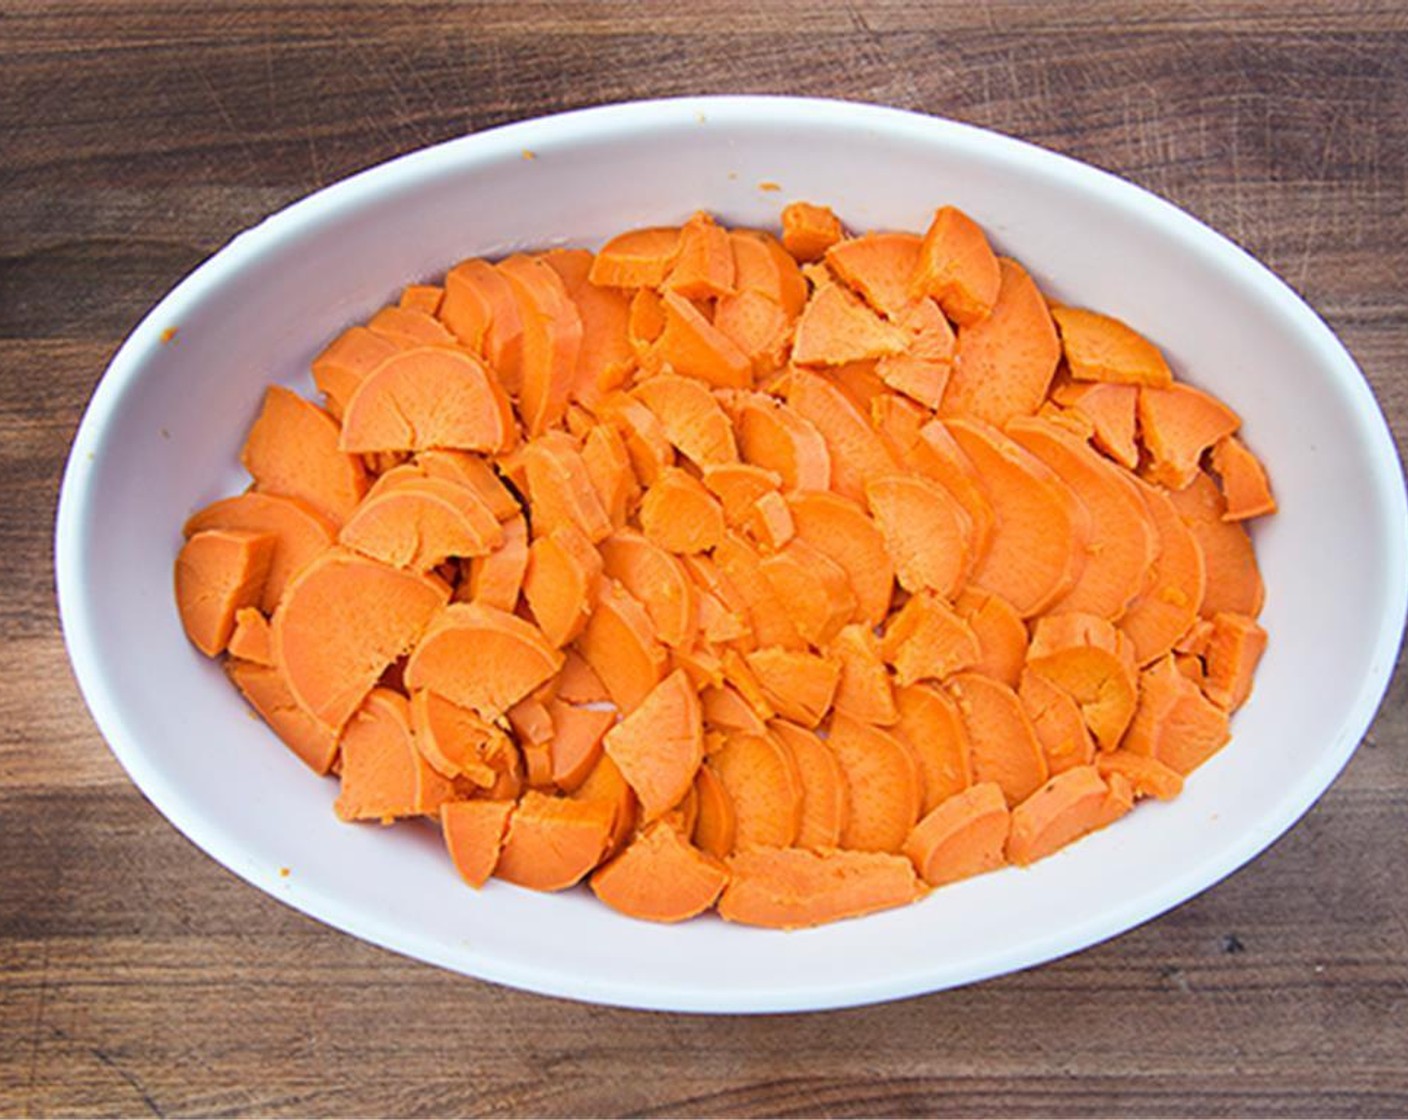 step 3 Drain, cool and cut the sweet potatoes into quarter-inch slices. Lightly grease another 8 x 11-inch baking dish.